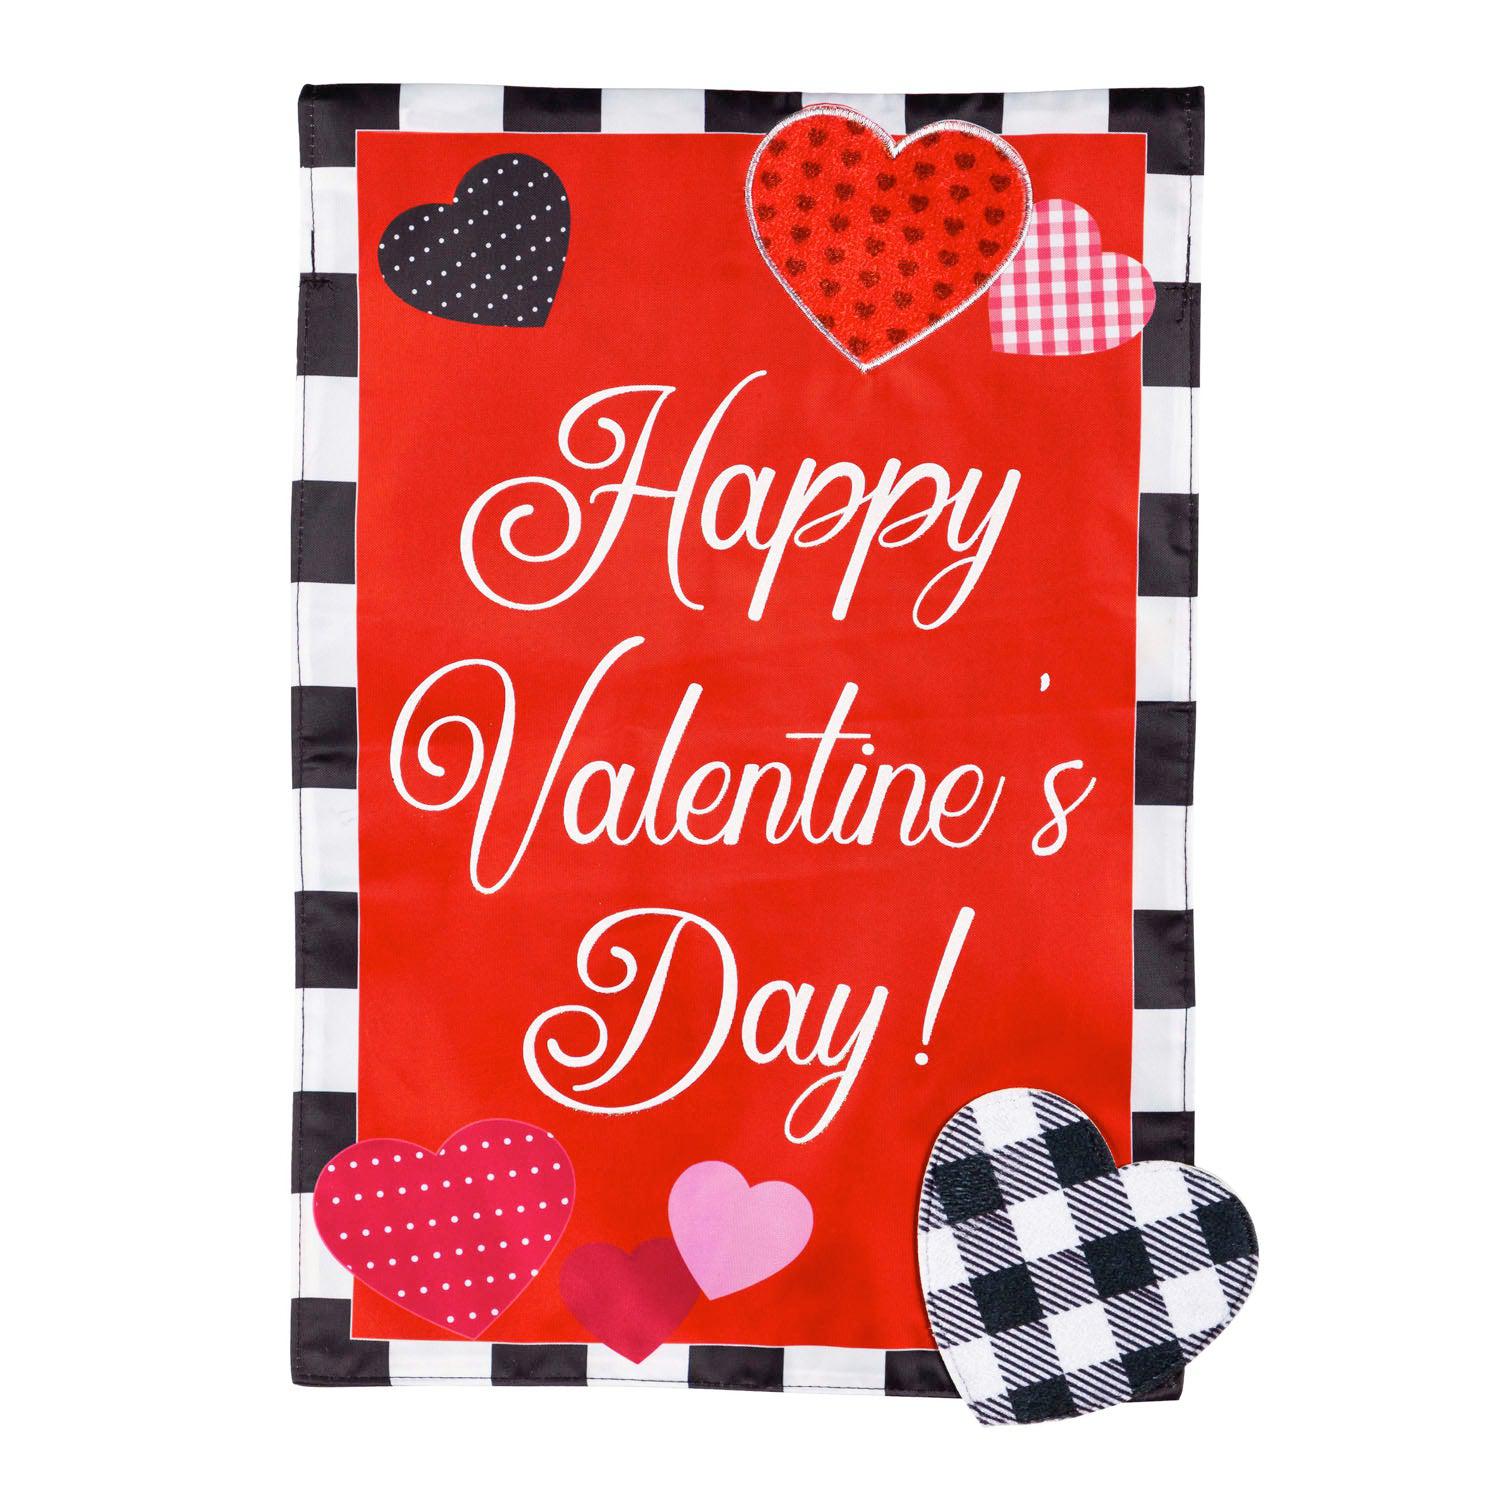 The Valentine's Day Check Border garden flag features a bright red background with a black and white checked border, patterned hearts, and the words "Happy Valentine's Day".